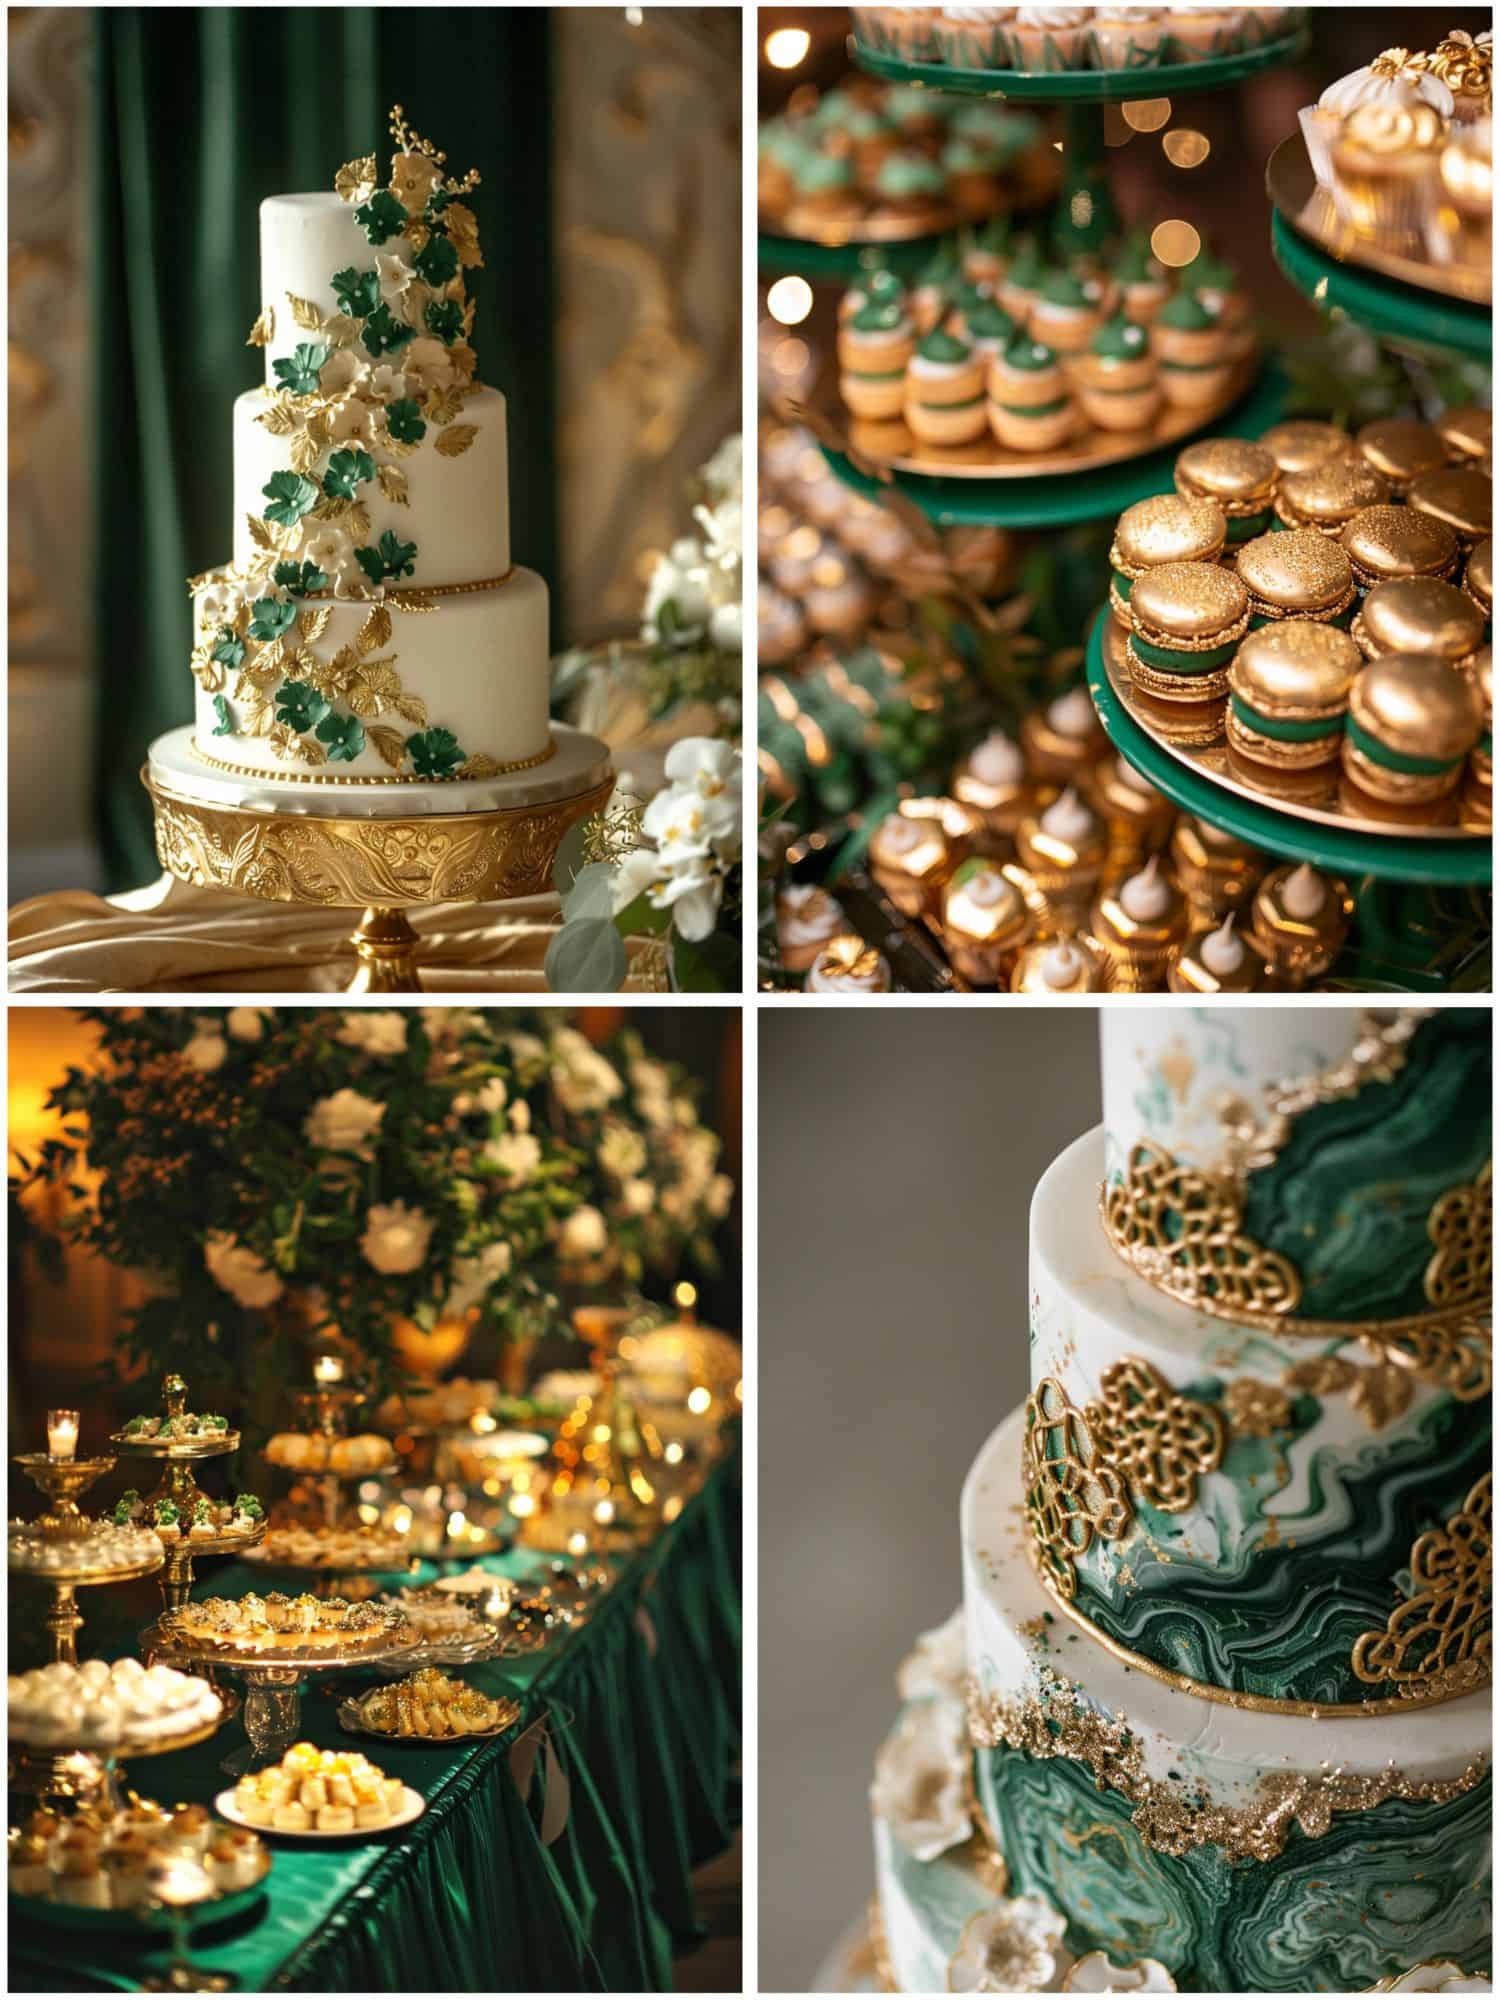 cakes and desserts for an emerald green and gold wedding